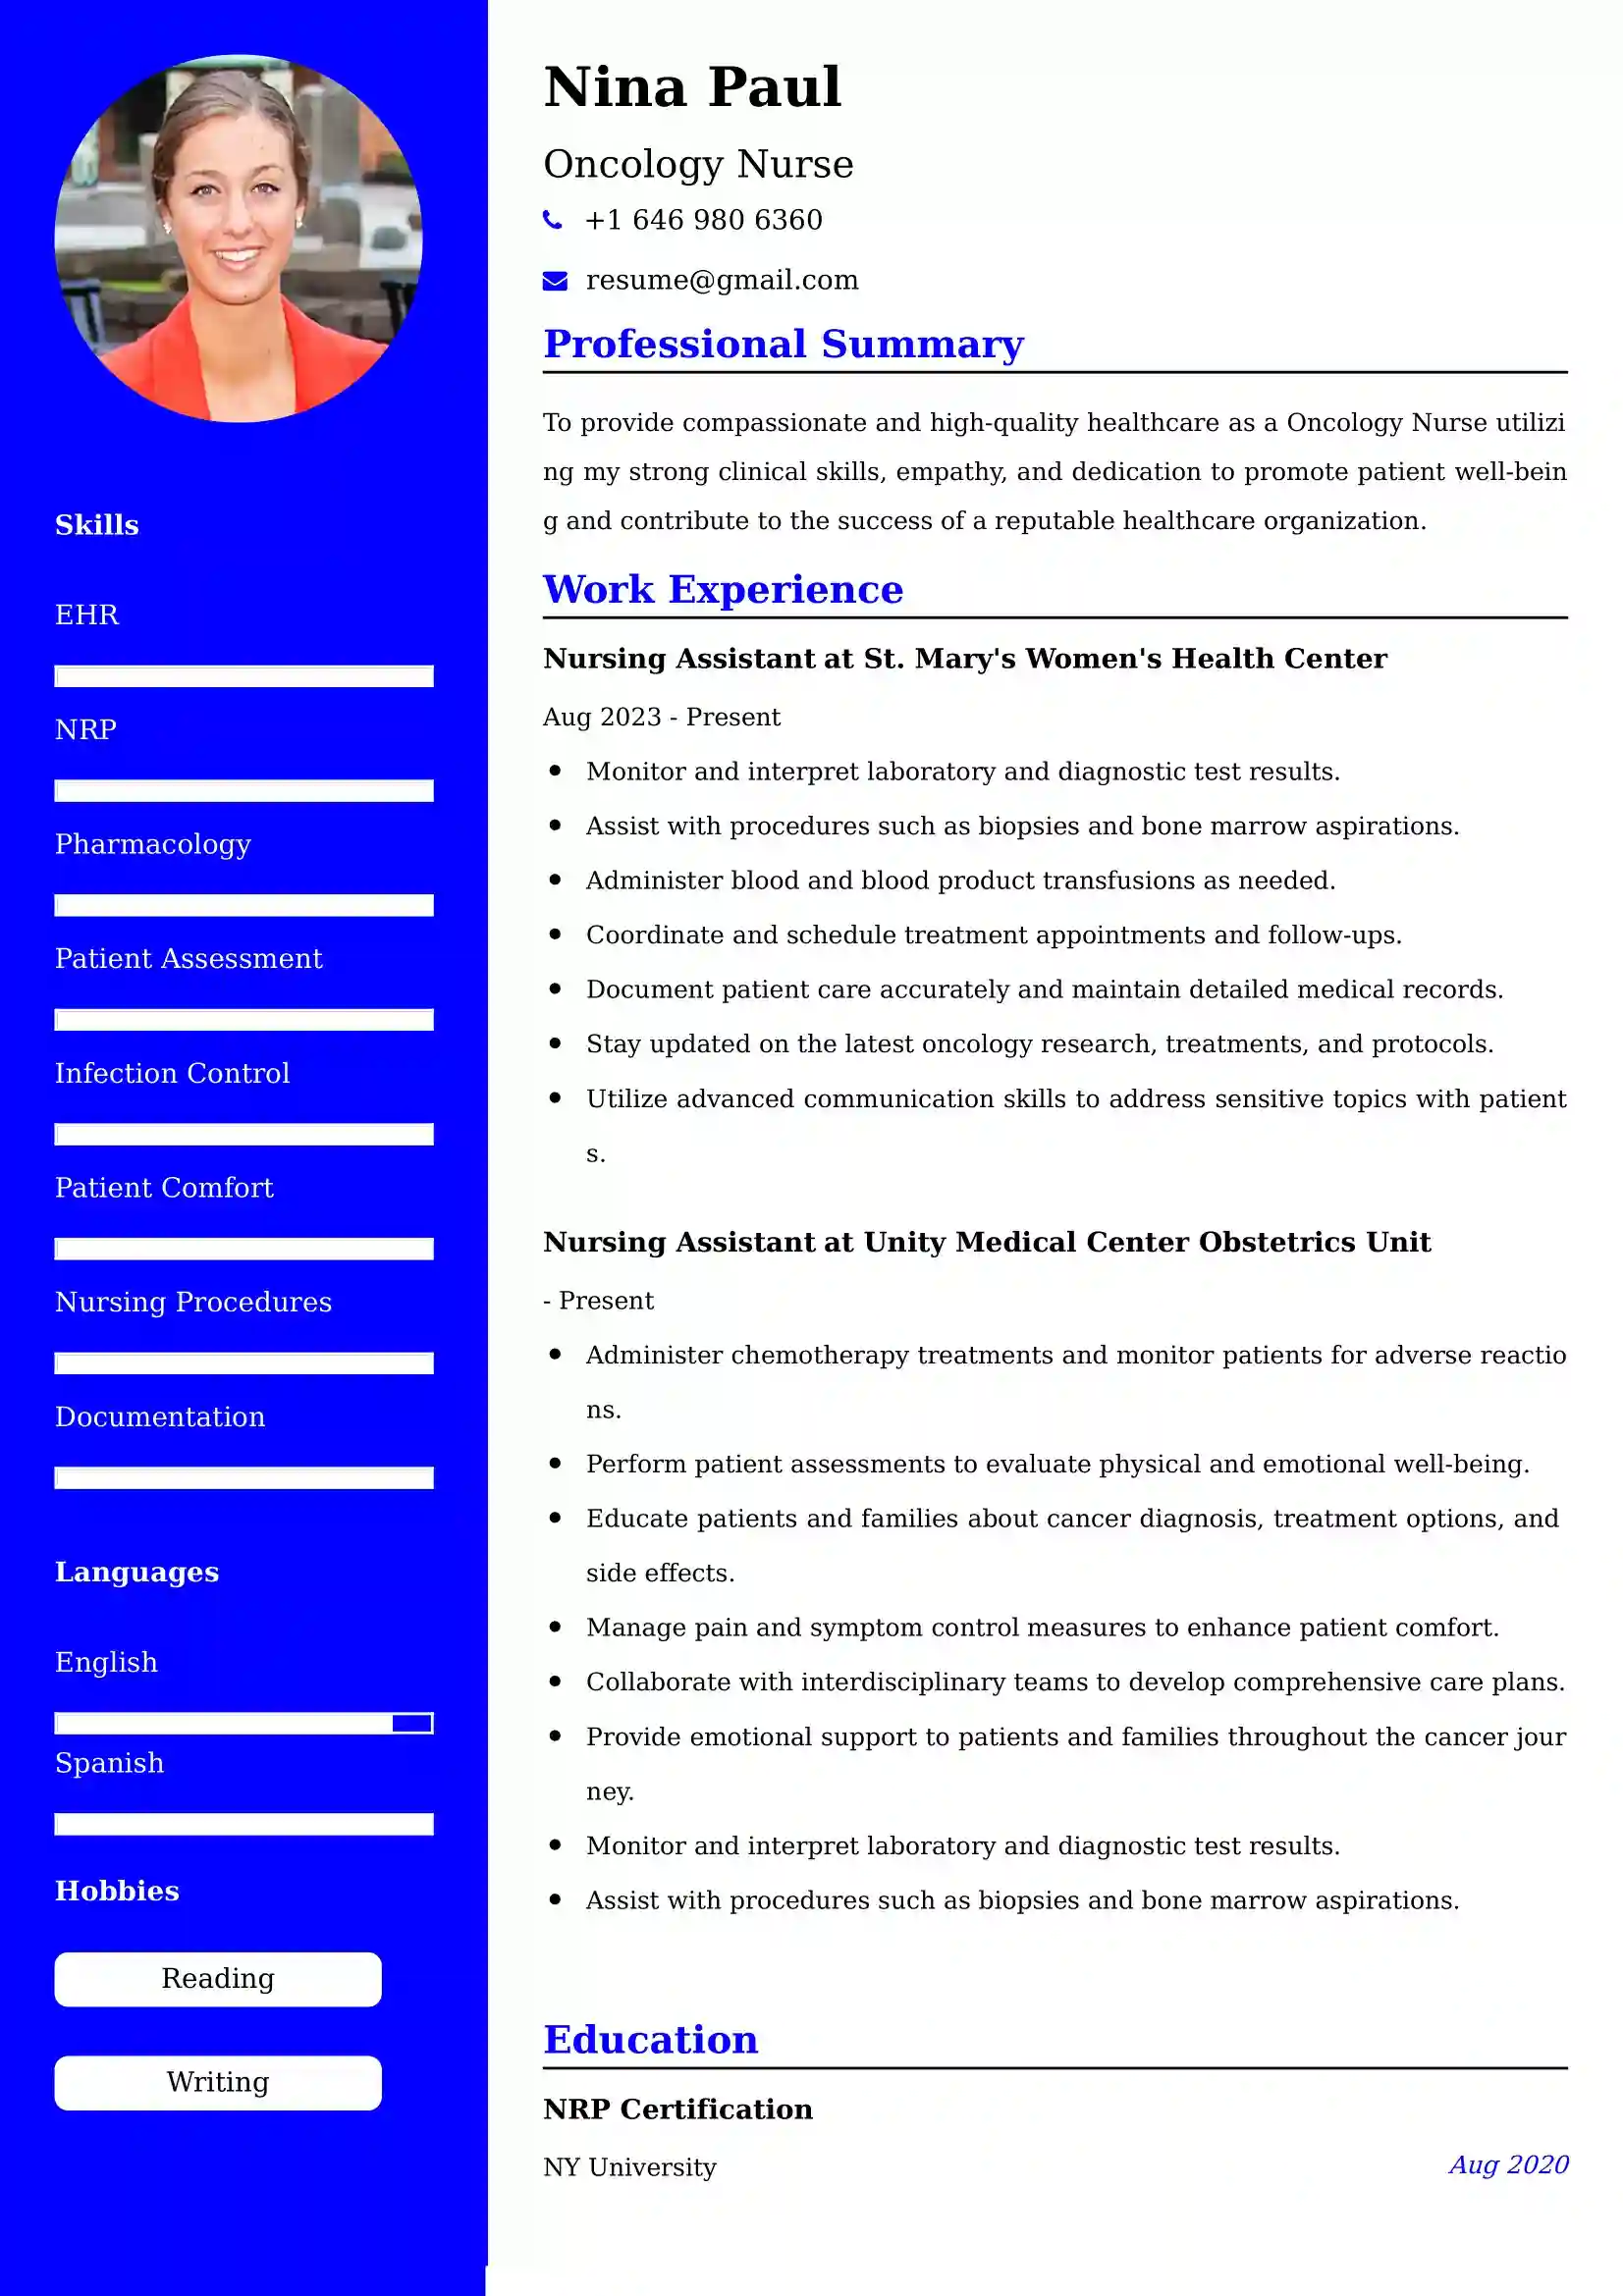 Oncology Nurse Resume Examples - Australian Format and Tips